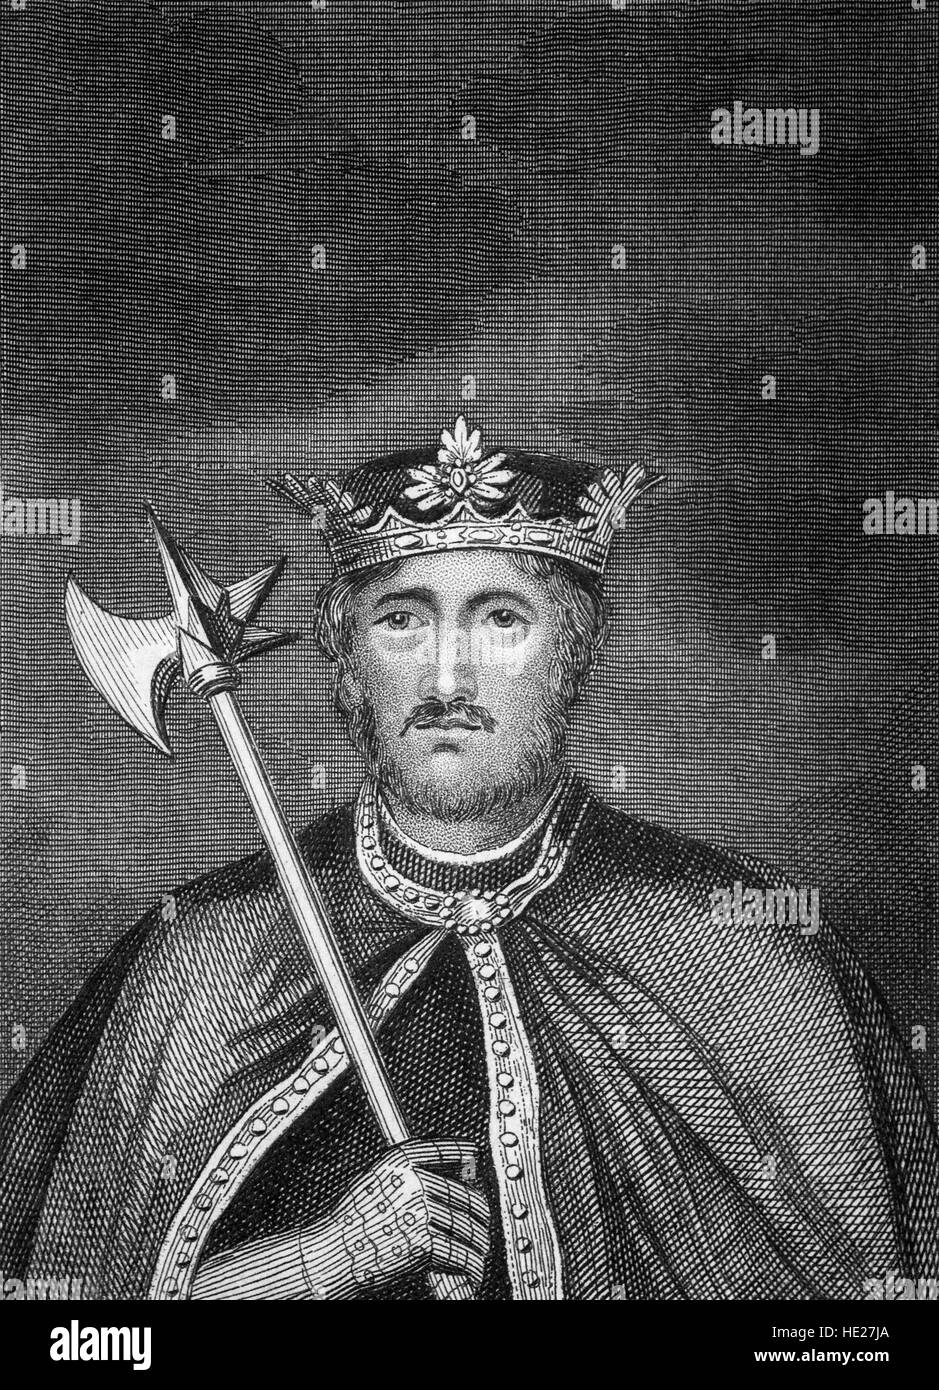 Richard I (1157 –1199) was King of England from 6 July 1189 until his death. He was the third of five sons of King Henry II of England and Duchess Eleanor of Aquitaine. He was known as Richard Cœur de Lion or Richard the Lionheart because of his reputation as a great military leader and warrior. Stock Photo